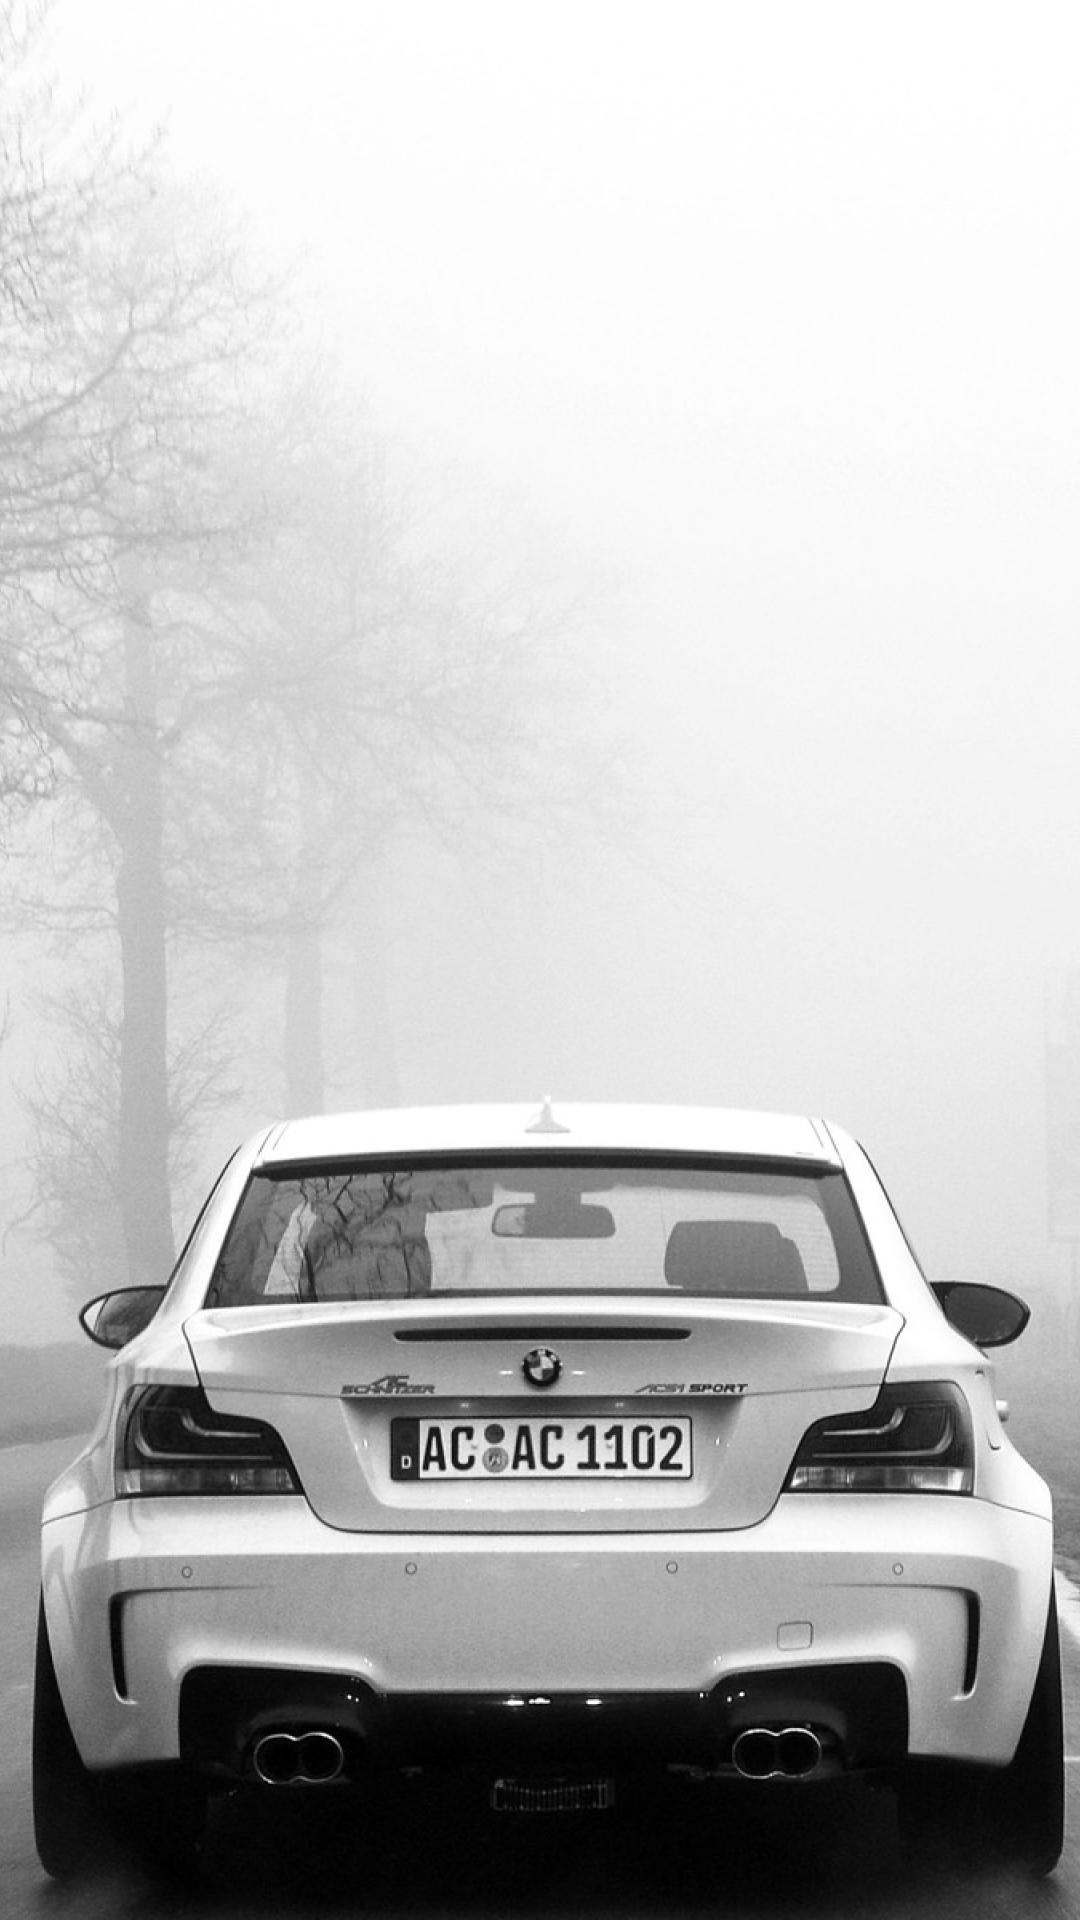 Bmw 135I Coupe Iphone 6 Plus Wallpaper